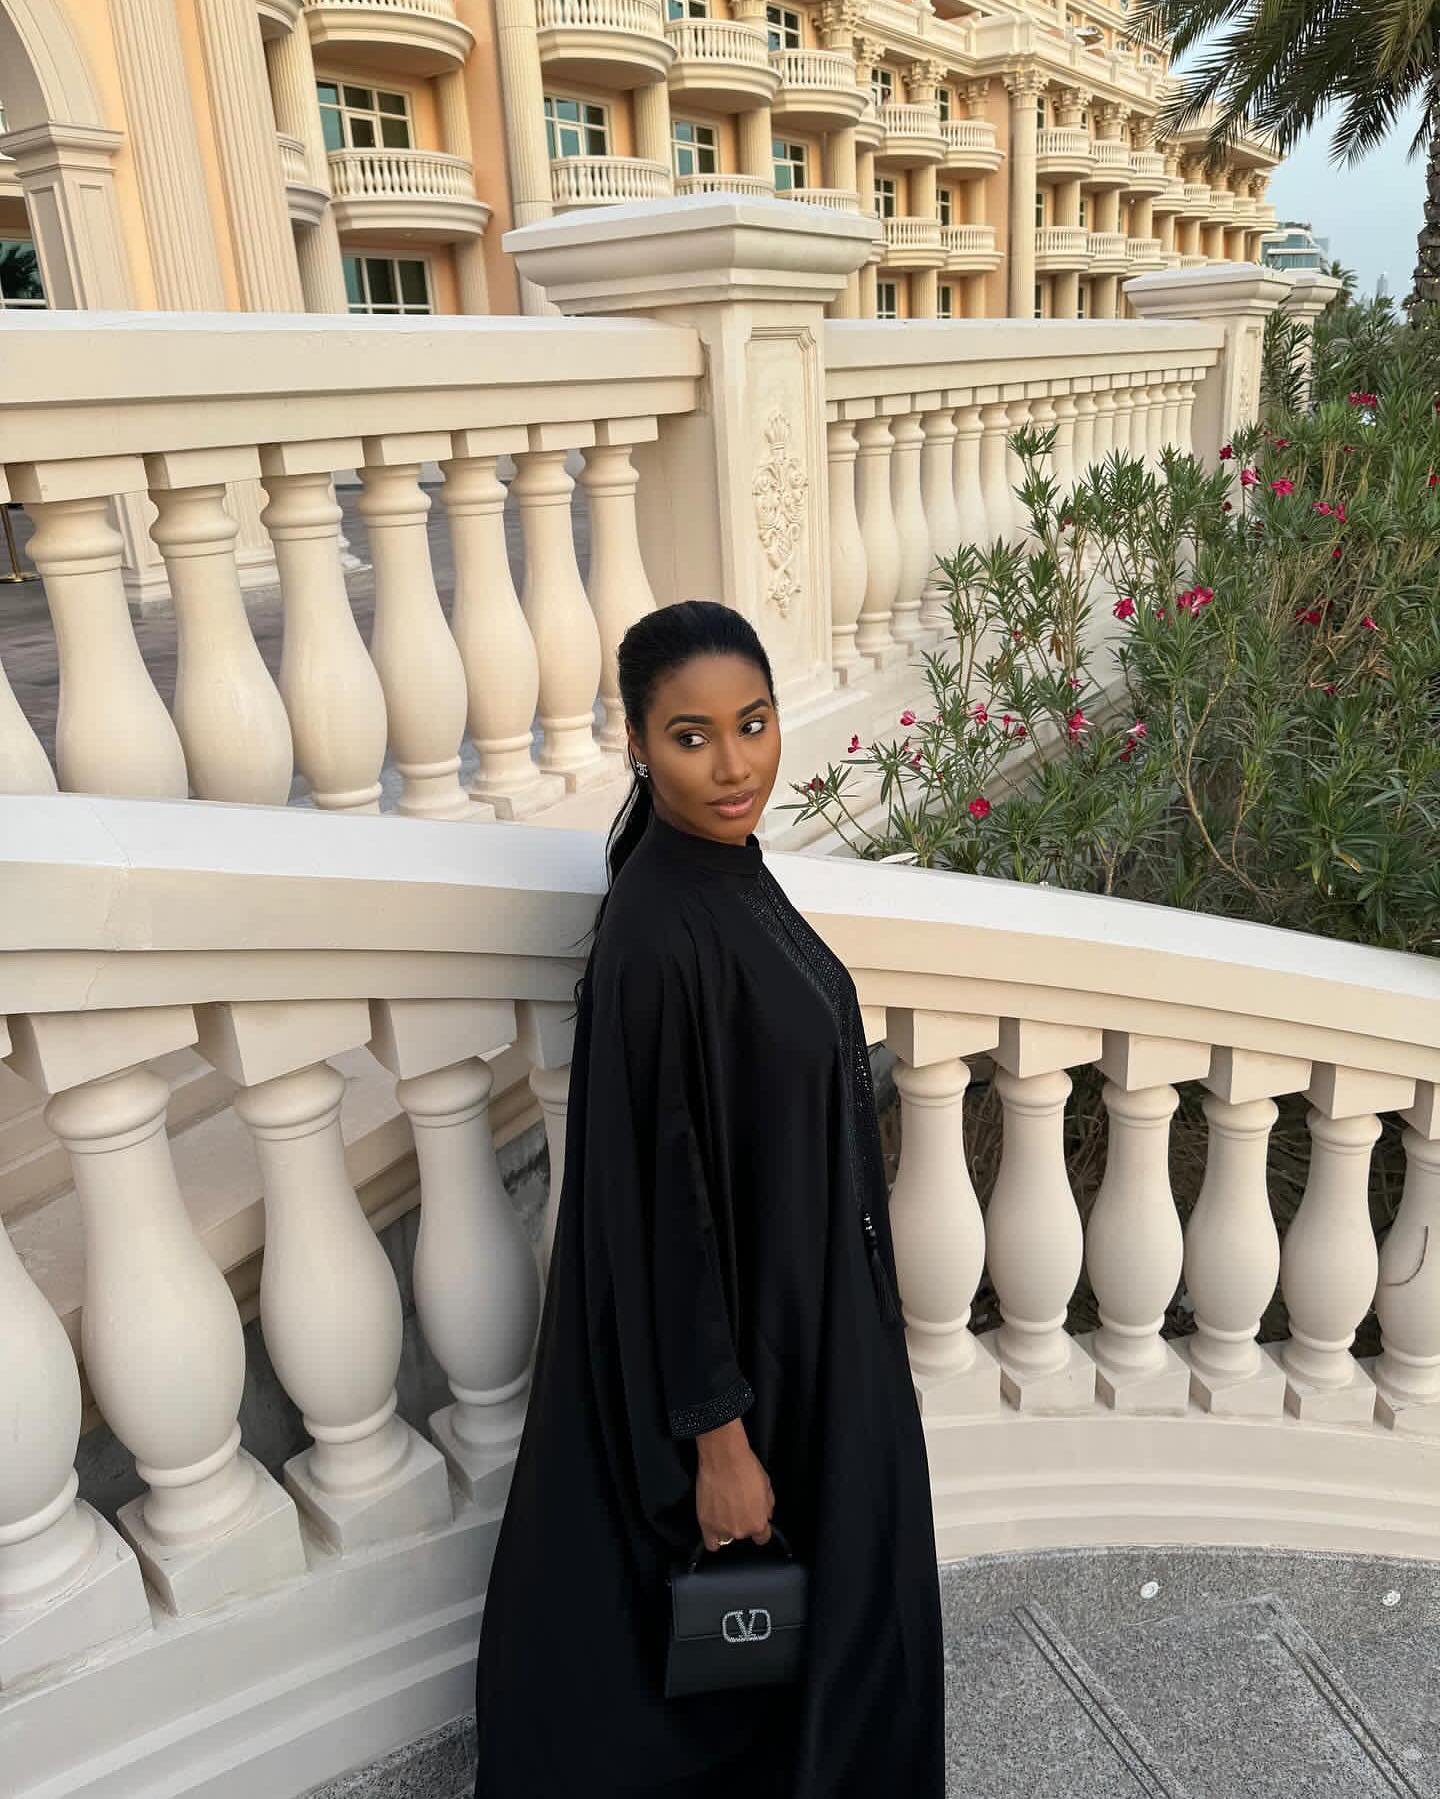 Our beautiful client wearing our crystal kaftan in black 🖤 
Limited edition only 1 piece remains 
DM to order 💬 
Same day shipping available in Dubai, express shipping worldwide with DHL 🚚